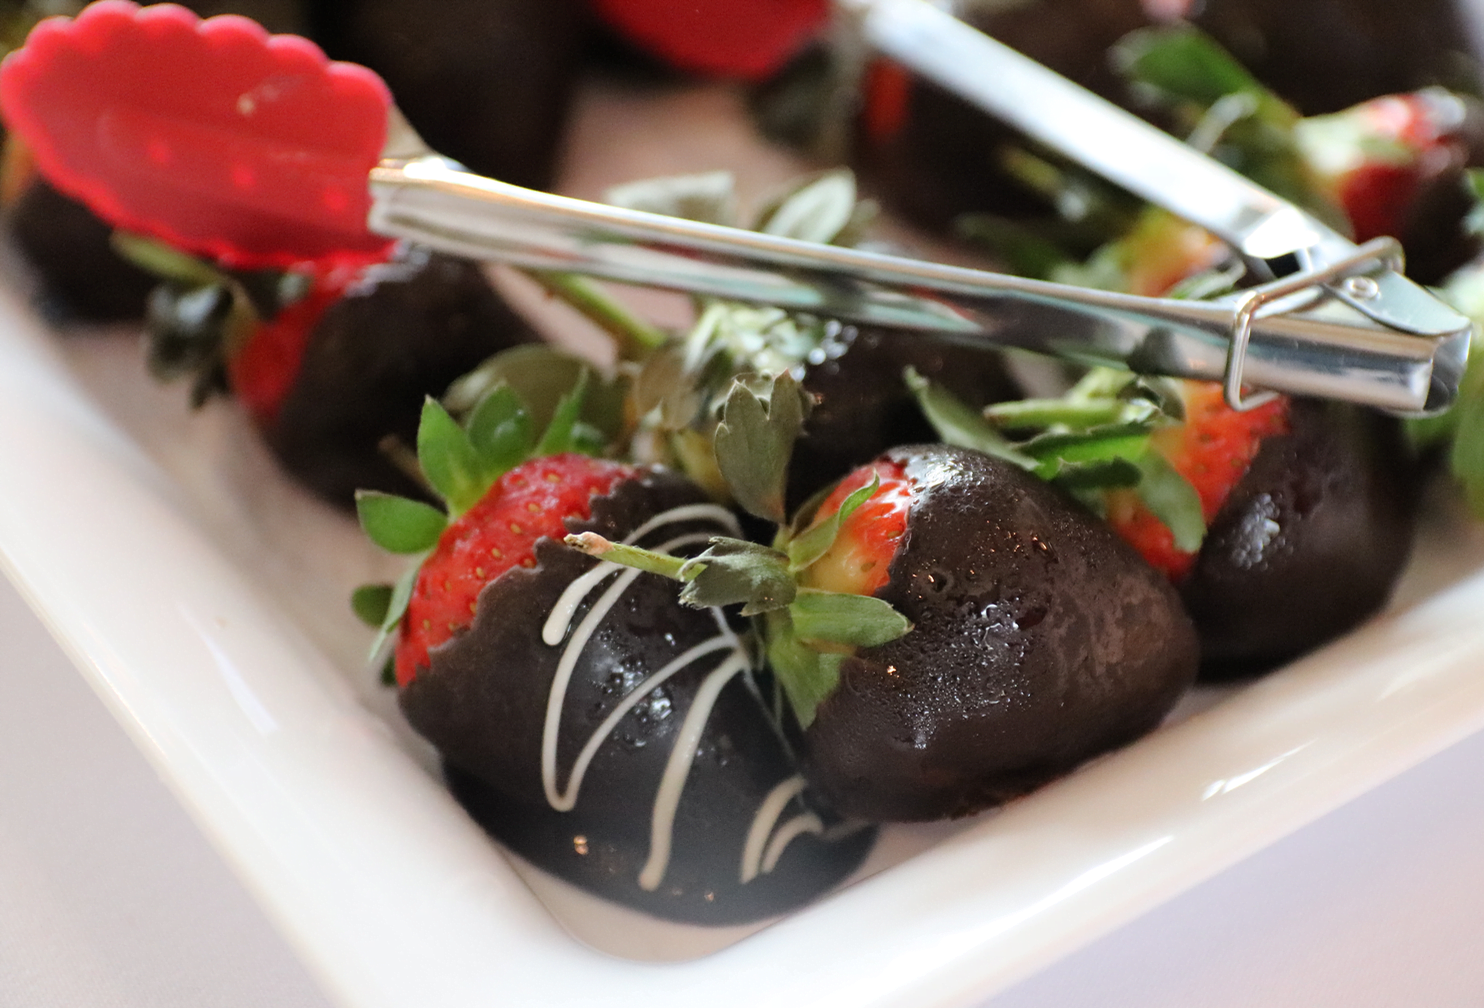 Strawberries dipped in chocolate at the "Chocolate Sunday" event at Greenwich Historical Society. Feb 16, 2020 Photo: Leslie Yager